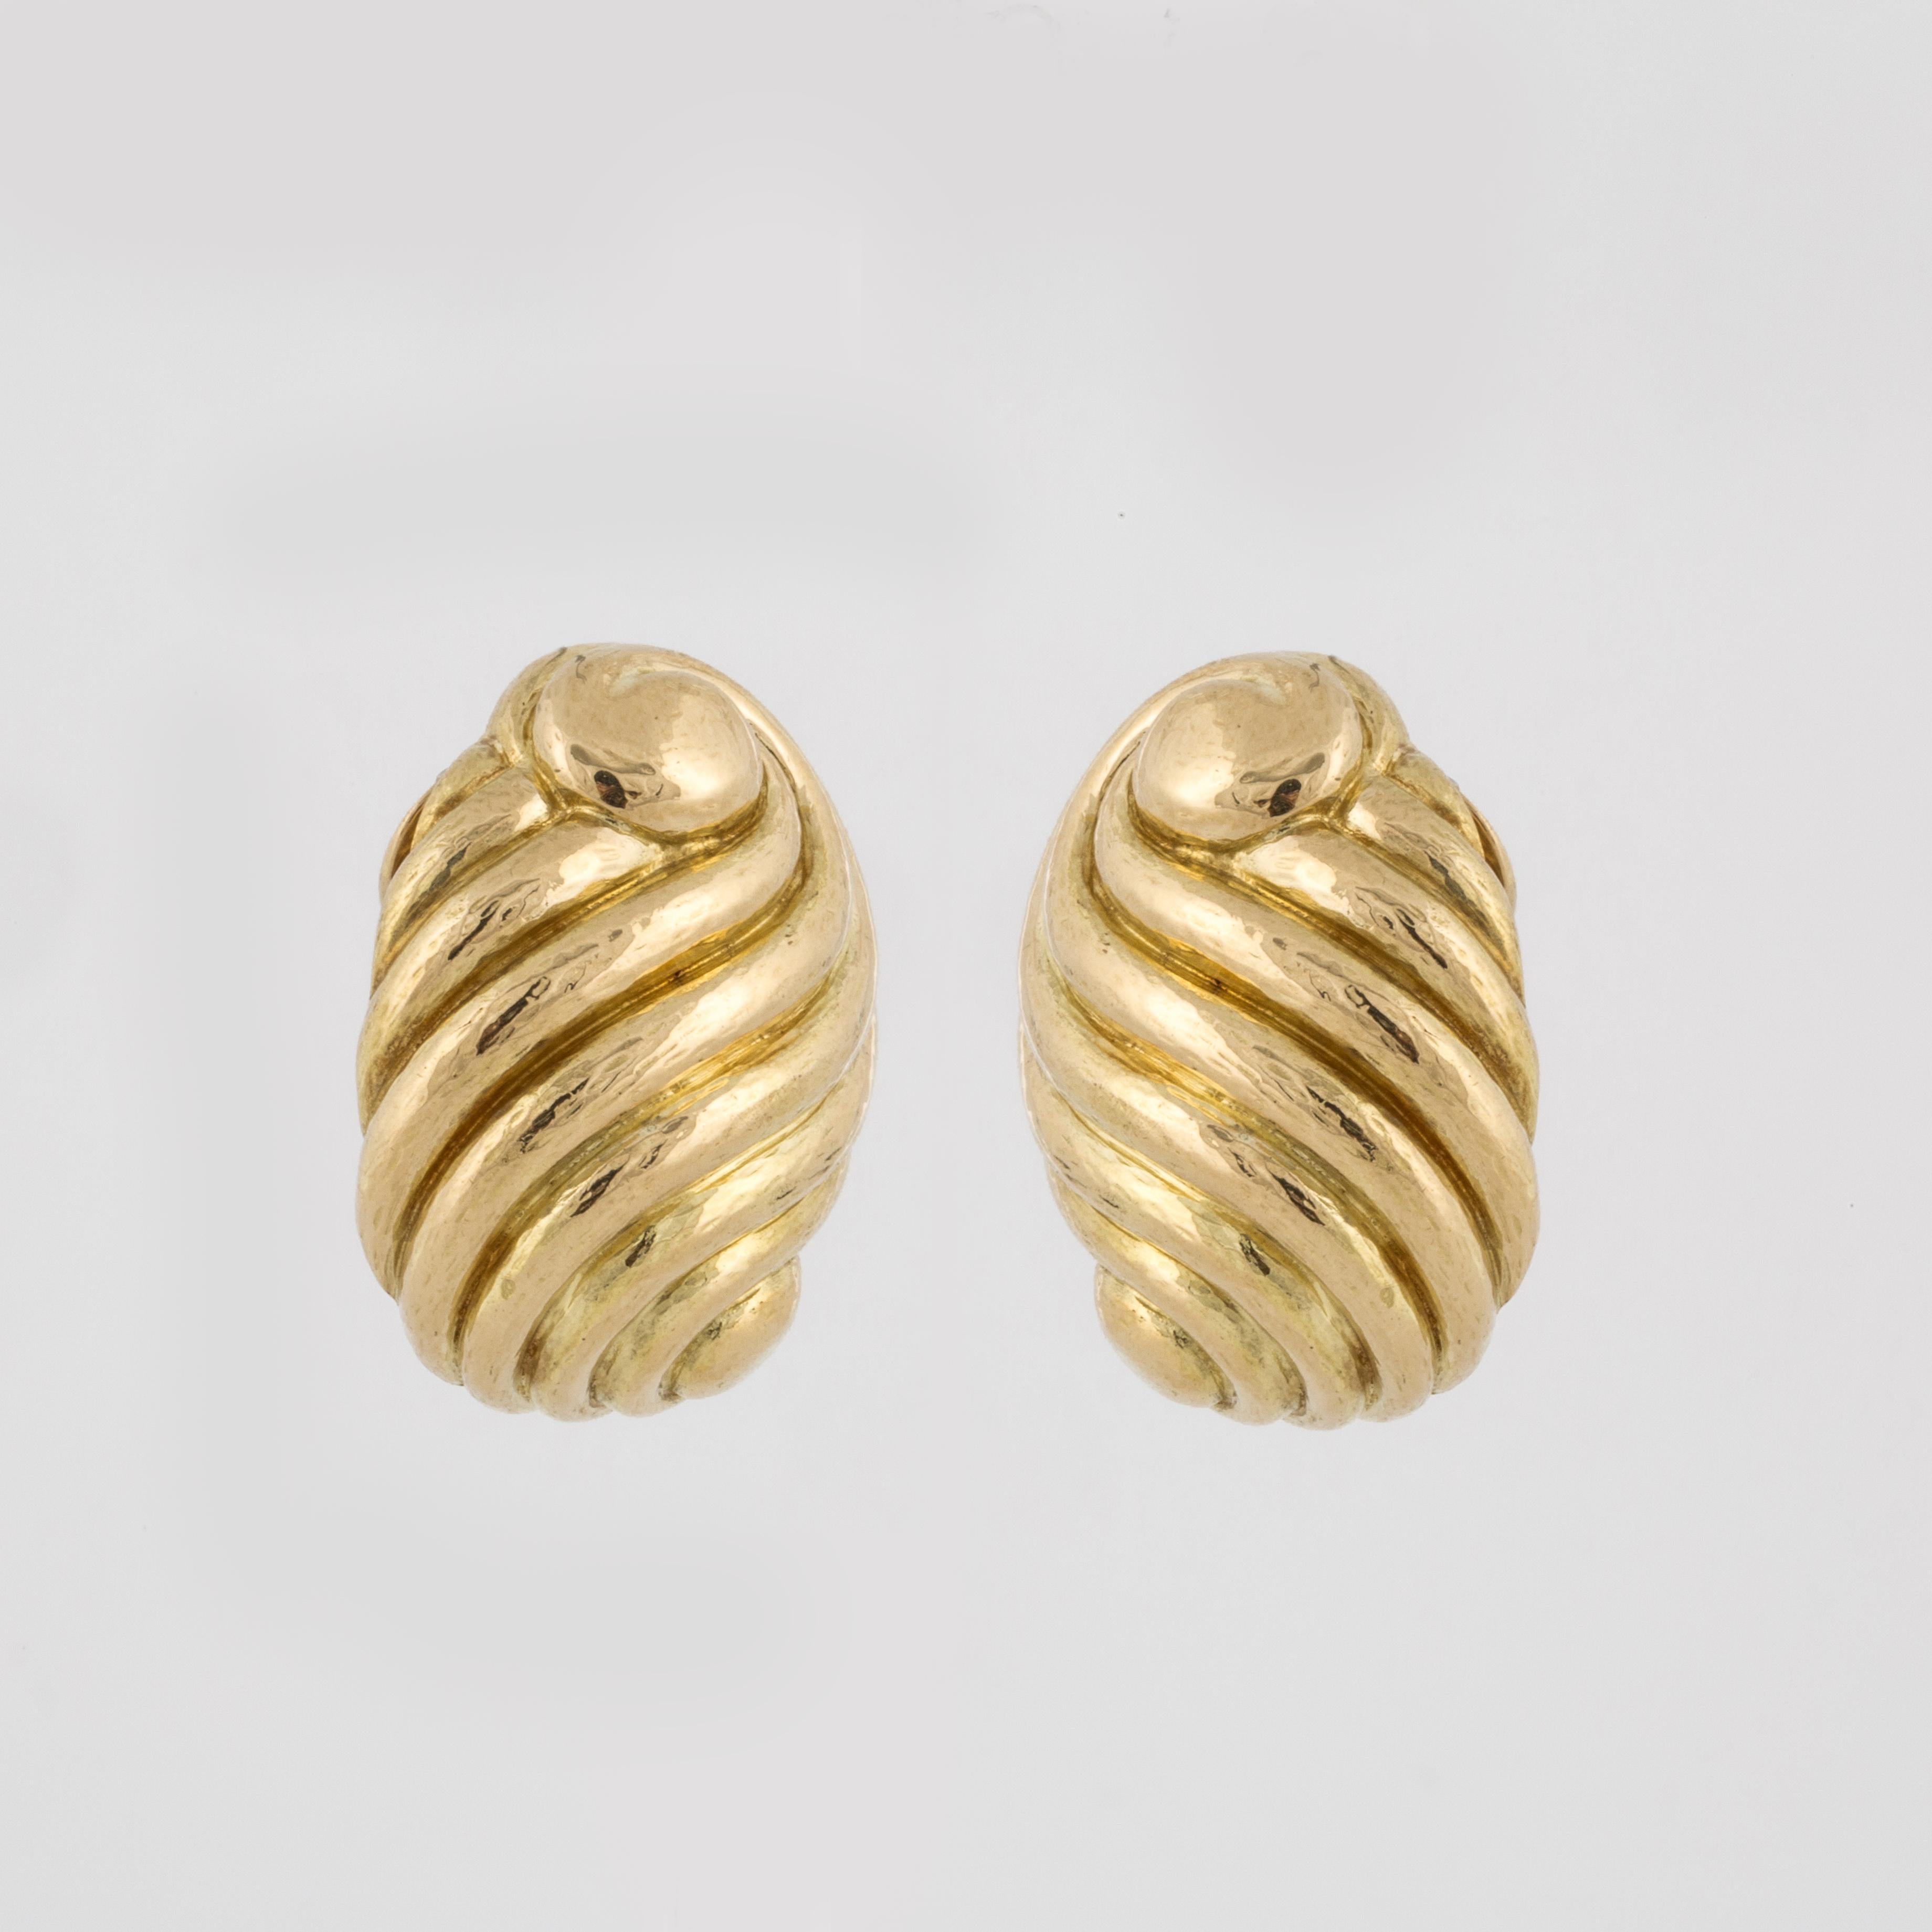 David Webb earrings composed of 18K yellow gold in a fluted swirl design.  The earrings are marked 